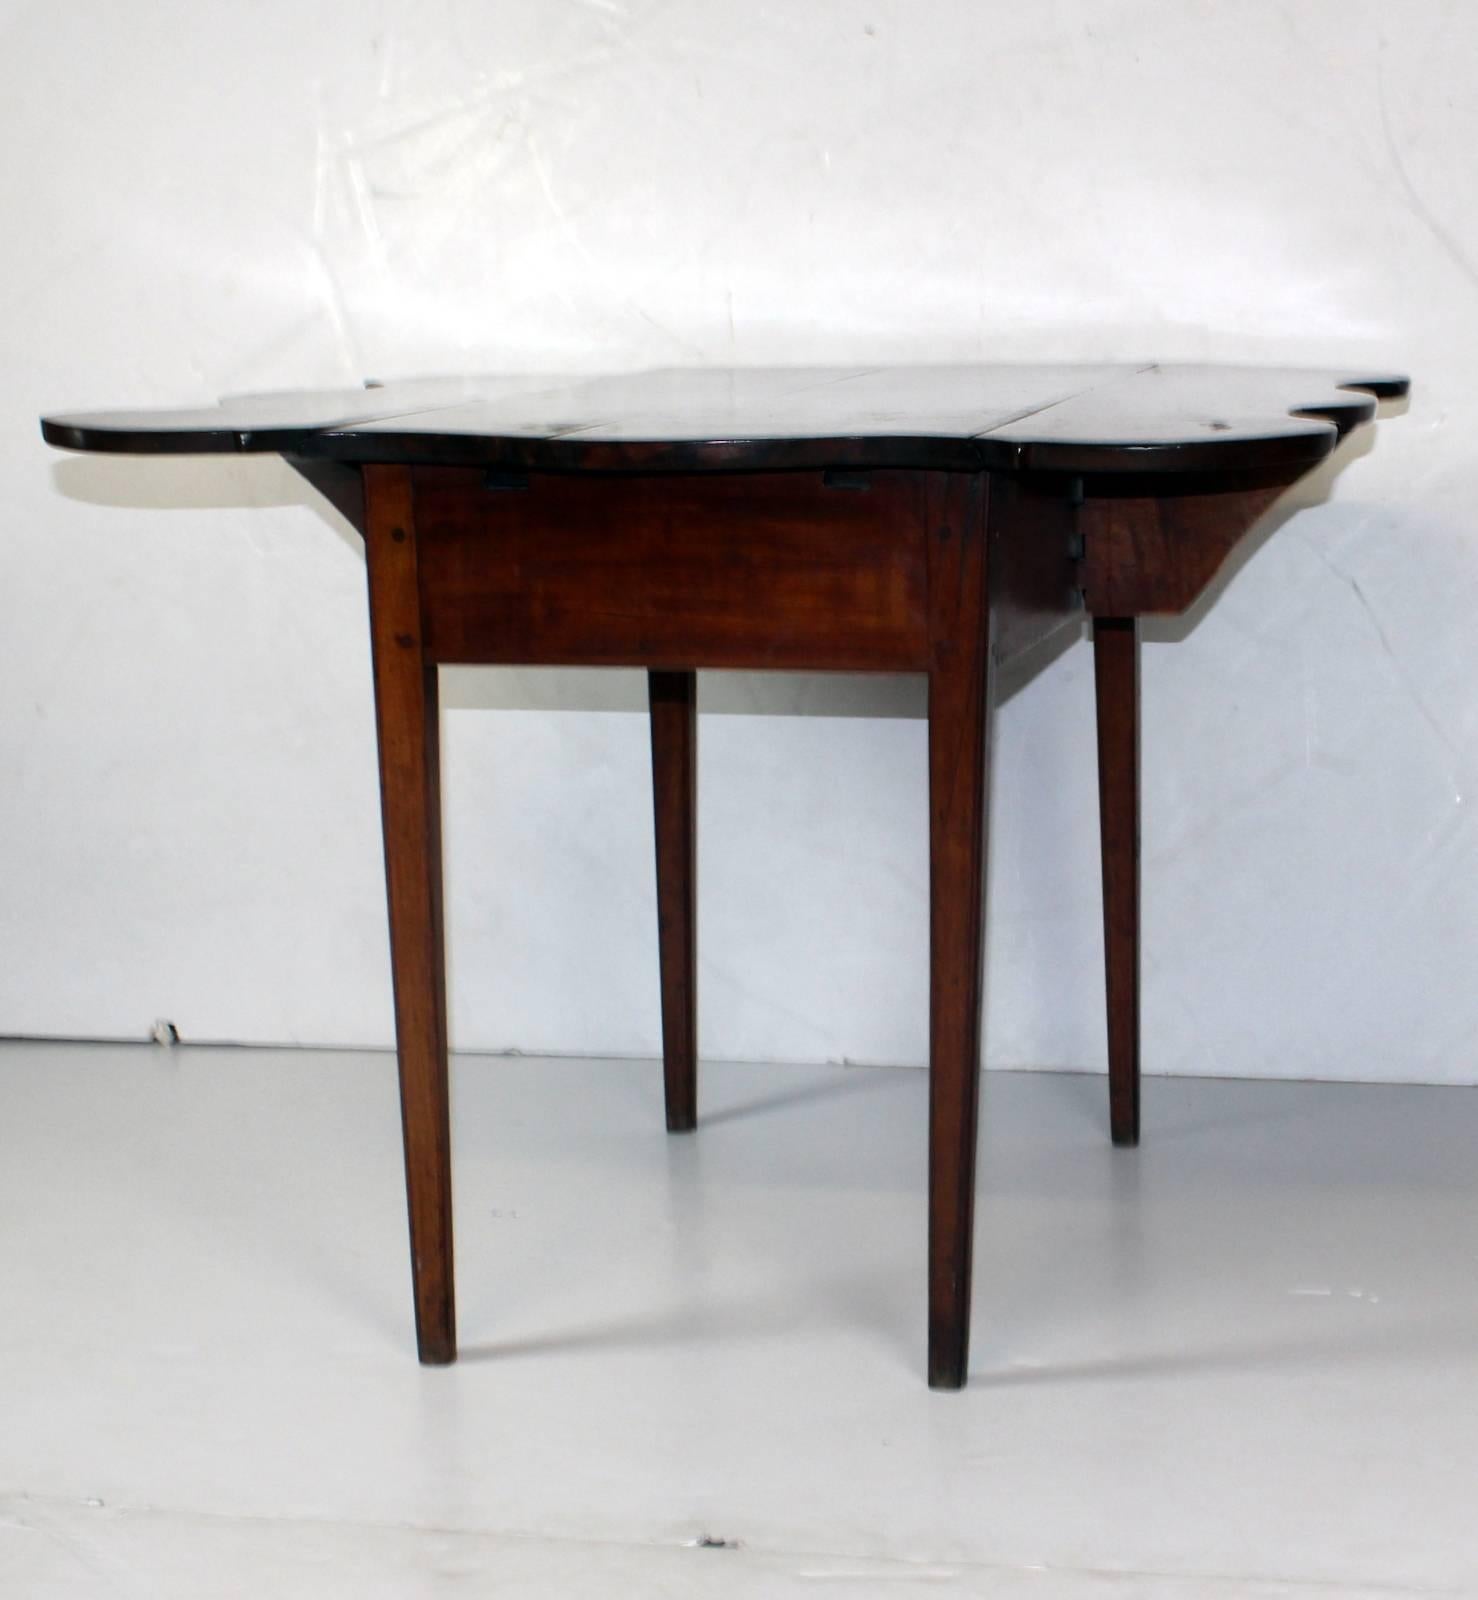 American curly walnut Pembroke table with four tapered legs. Opened 35